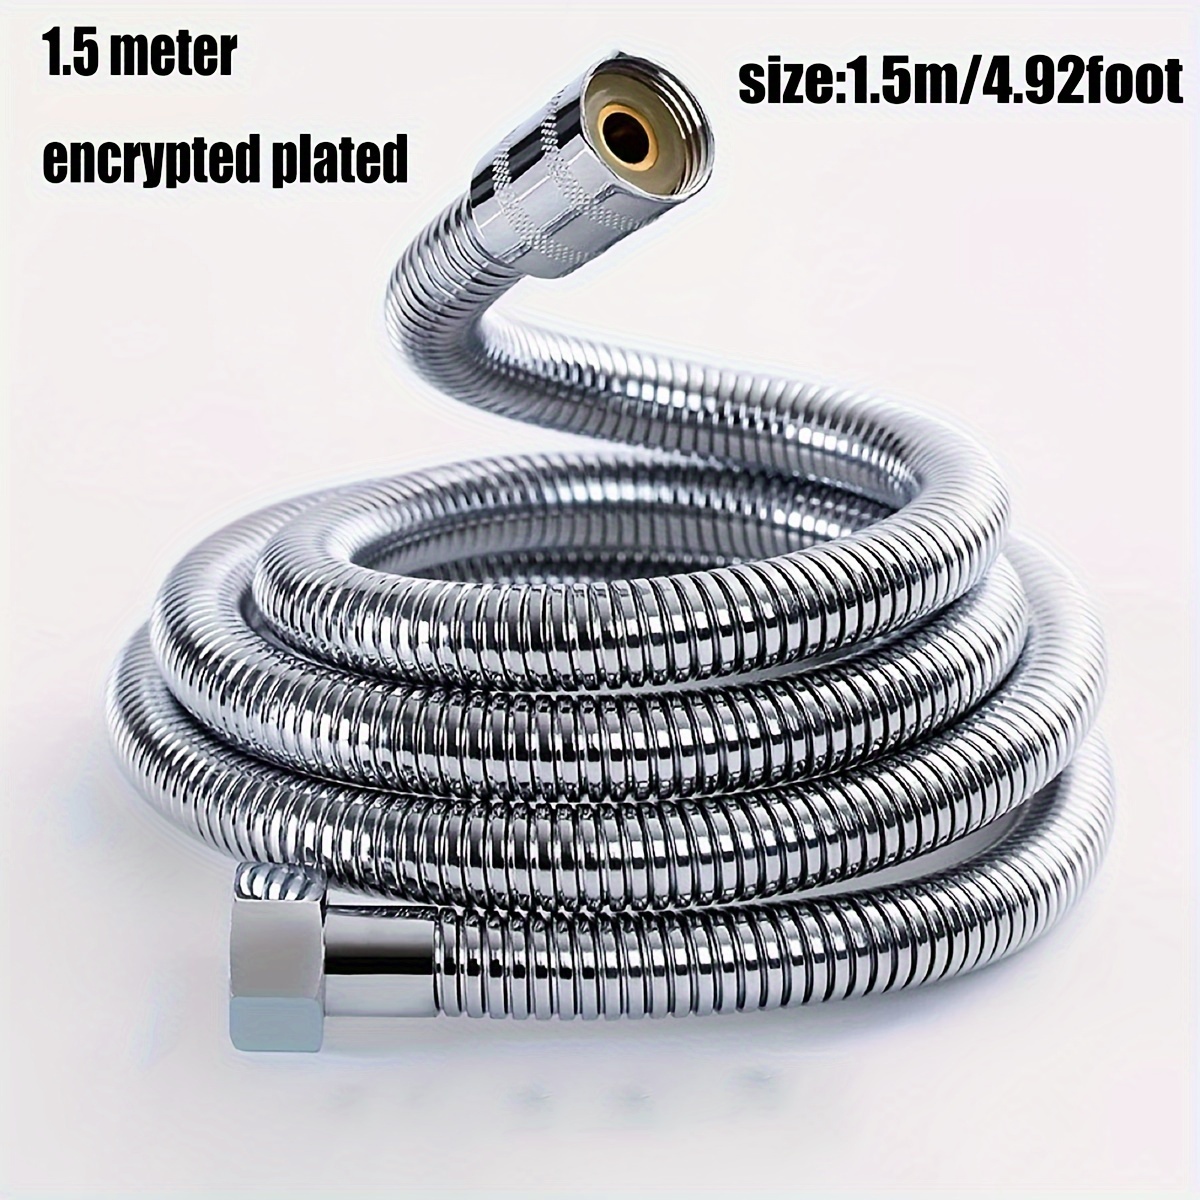 

1pc Shower Pipe, Bathroom Encryption Explosion-proof Stainless Steel Shower Pipe, Water Heater Water Pipe, Stainless Steel Shower Hose, Universal Bathroom Accessories